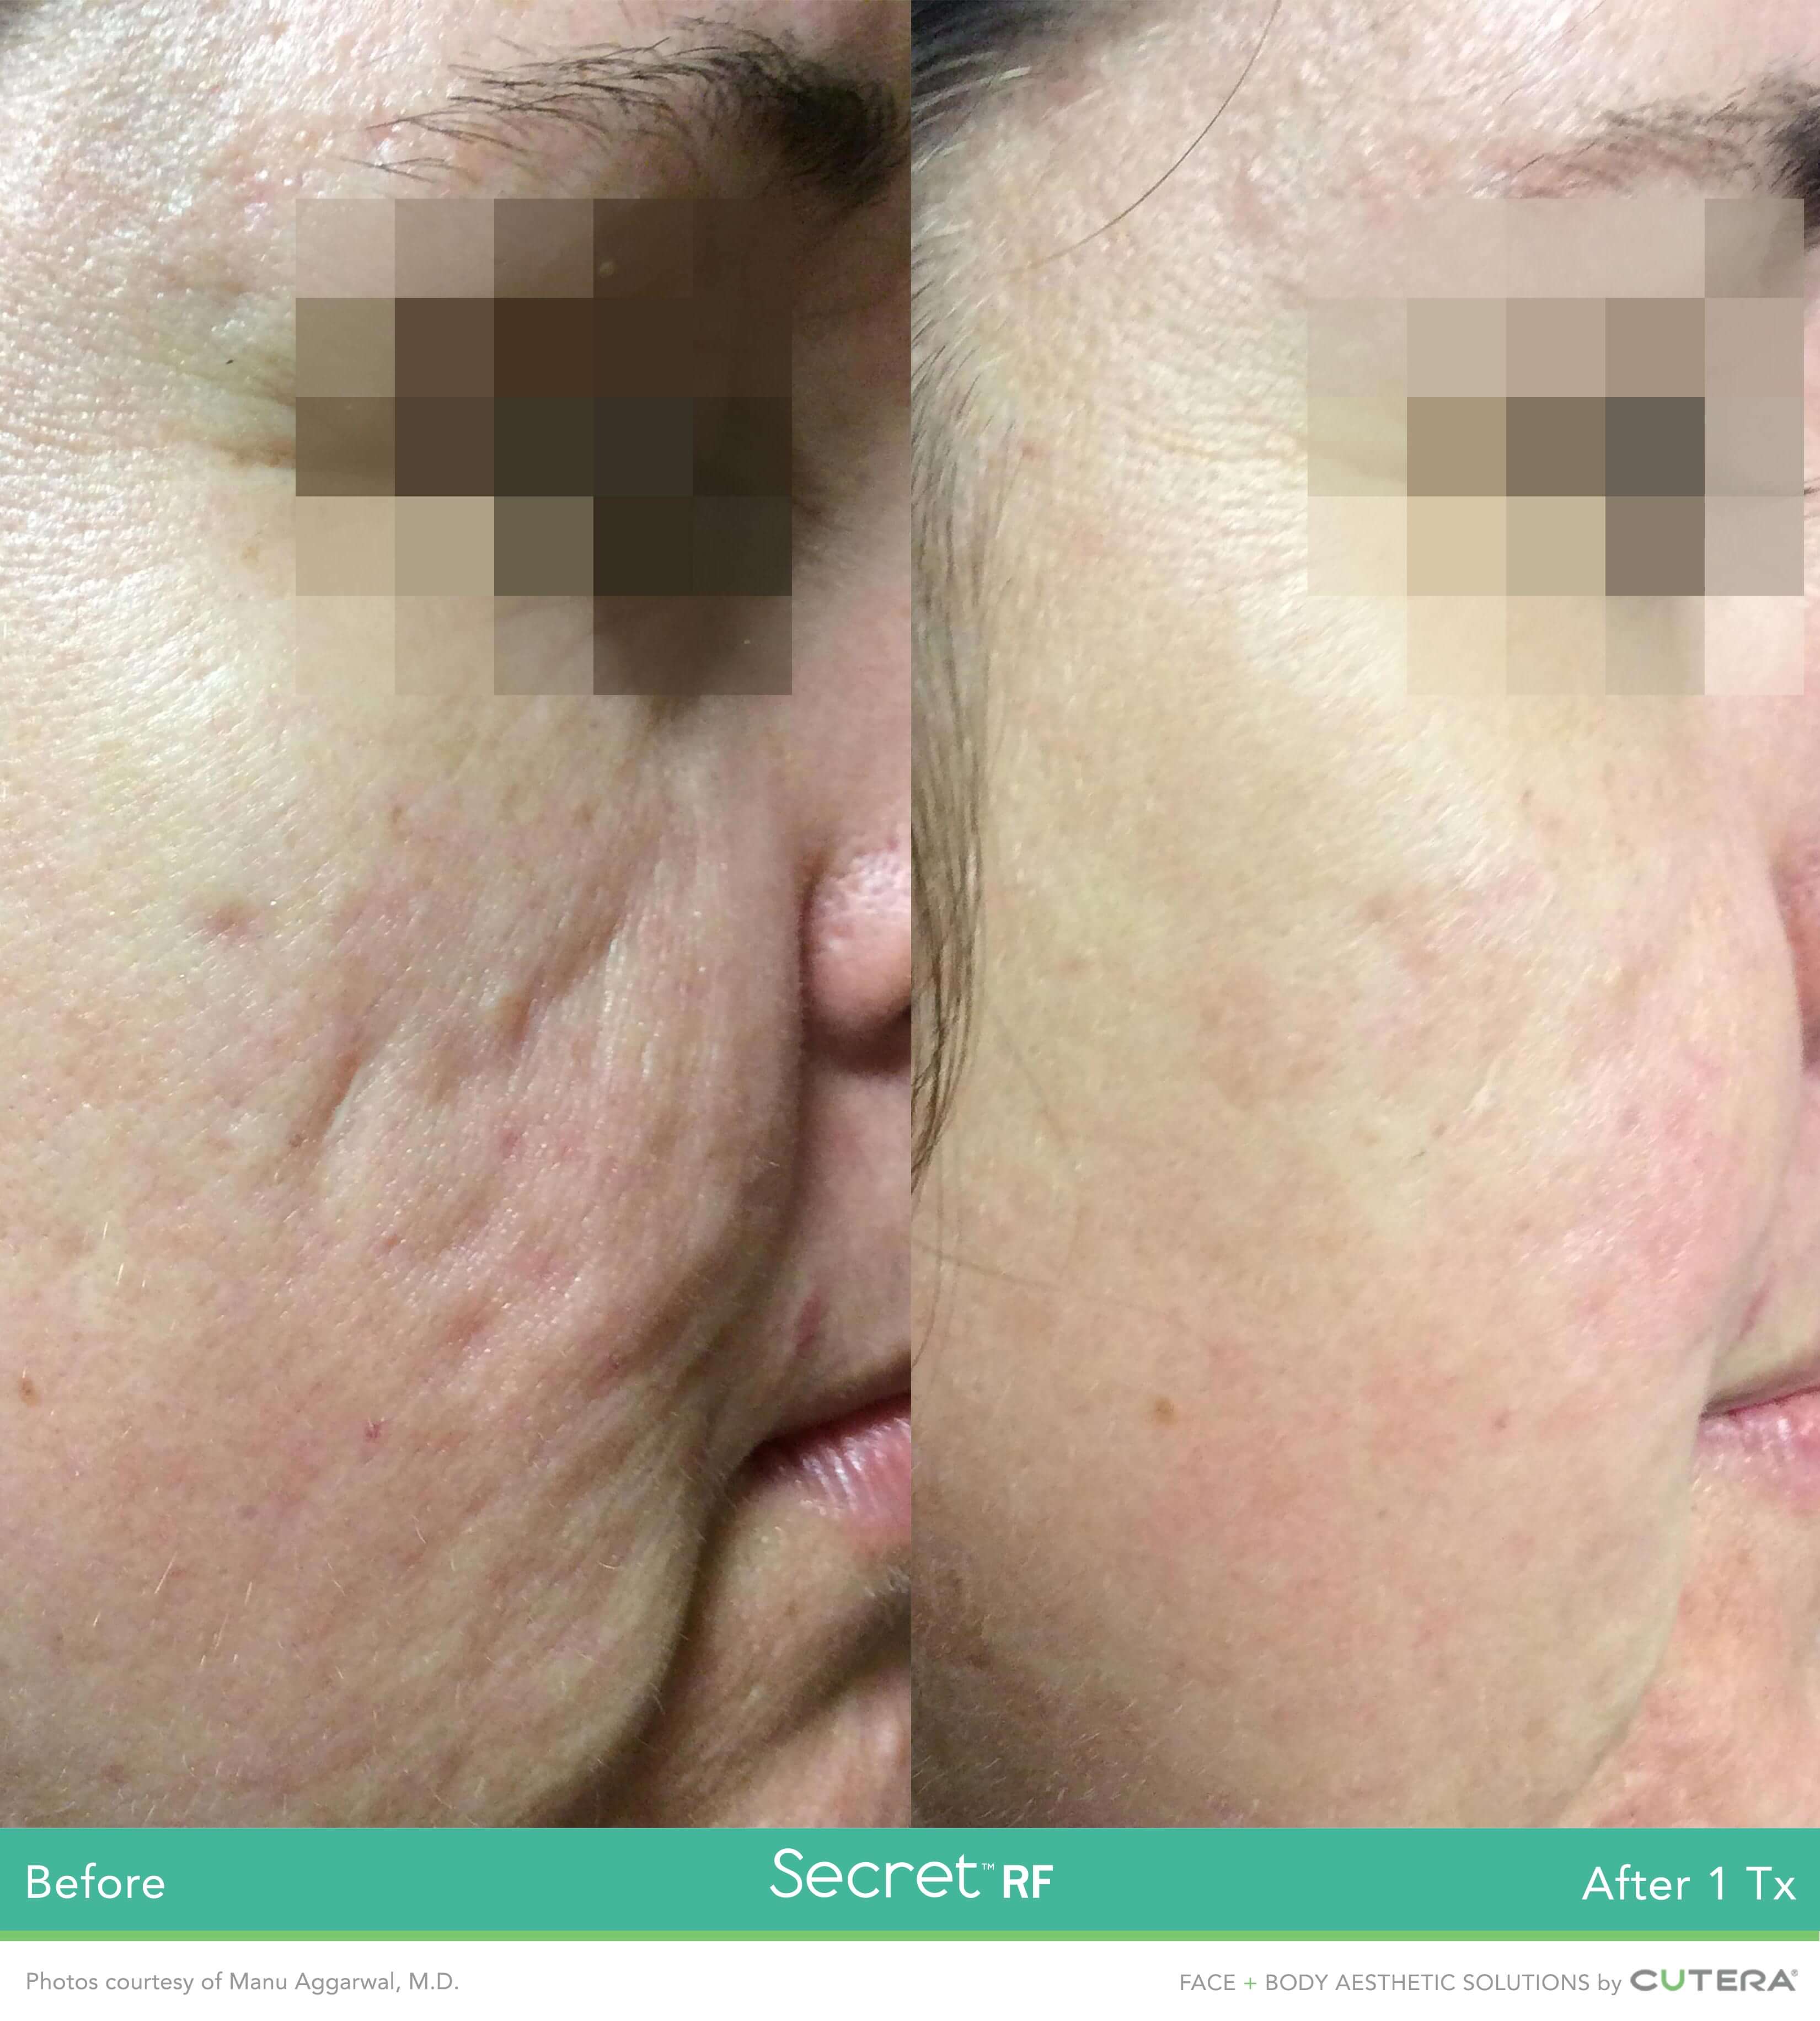 Before and after image of acne scar removal treatment after 1 treatment session with Secret RF- Miami Skin Spa